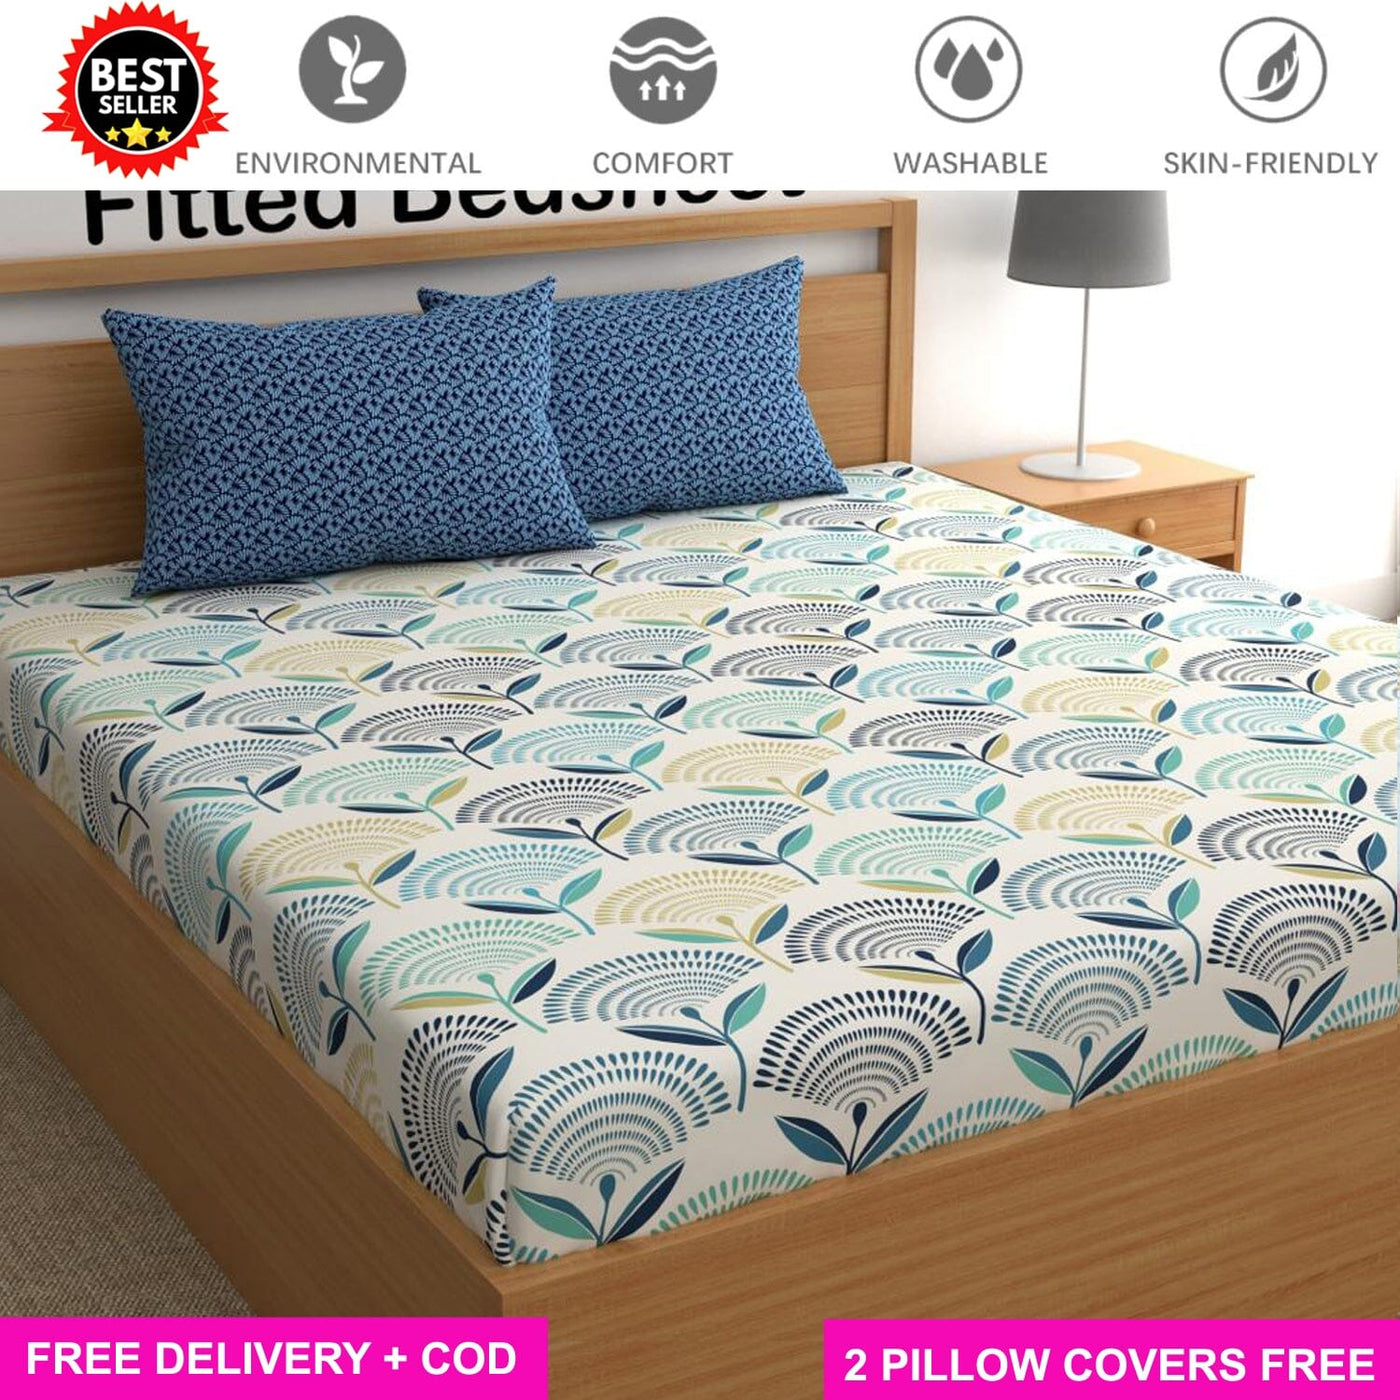 Blue Farm Contrast Full Elastic Fitted Bedsheet with 2 Pillow Covers - King Size Bed Sheets Great Happy IN 